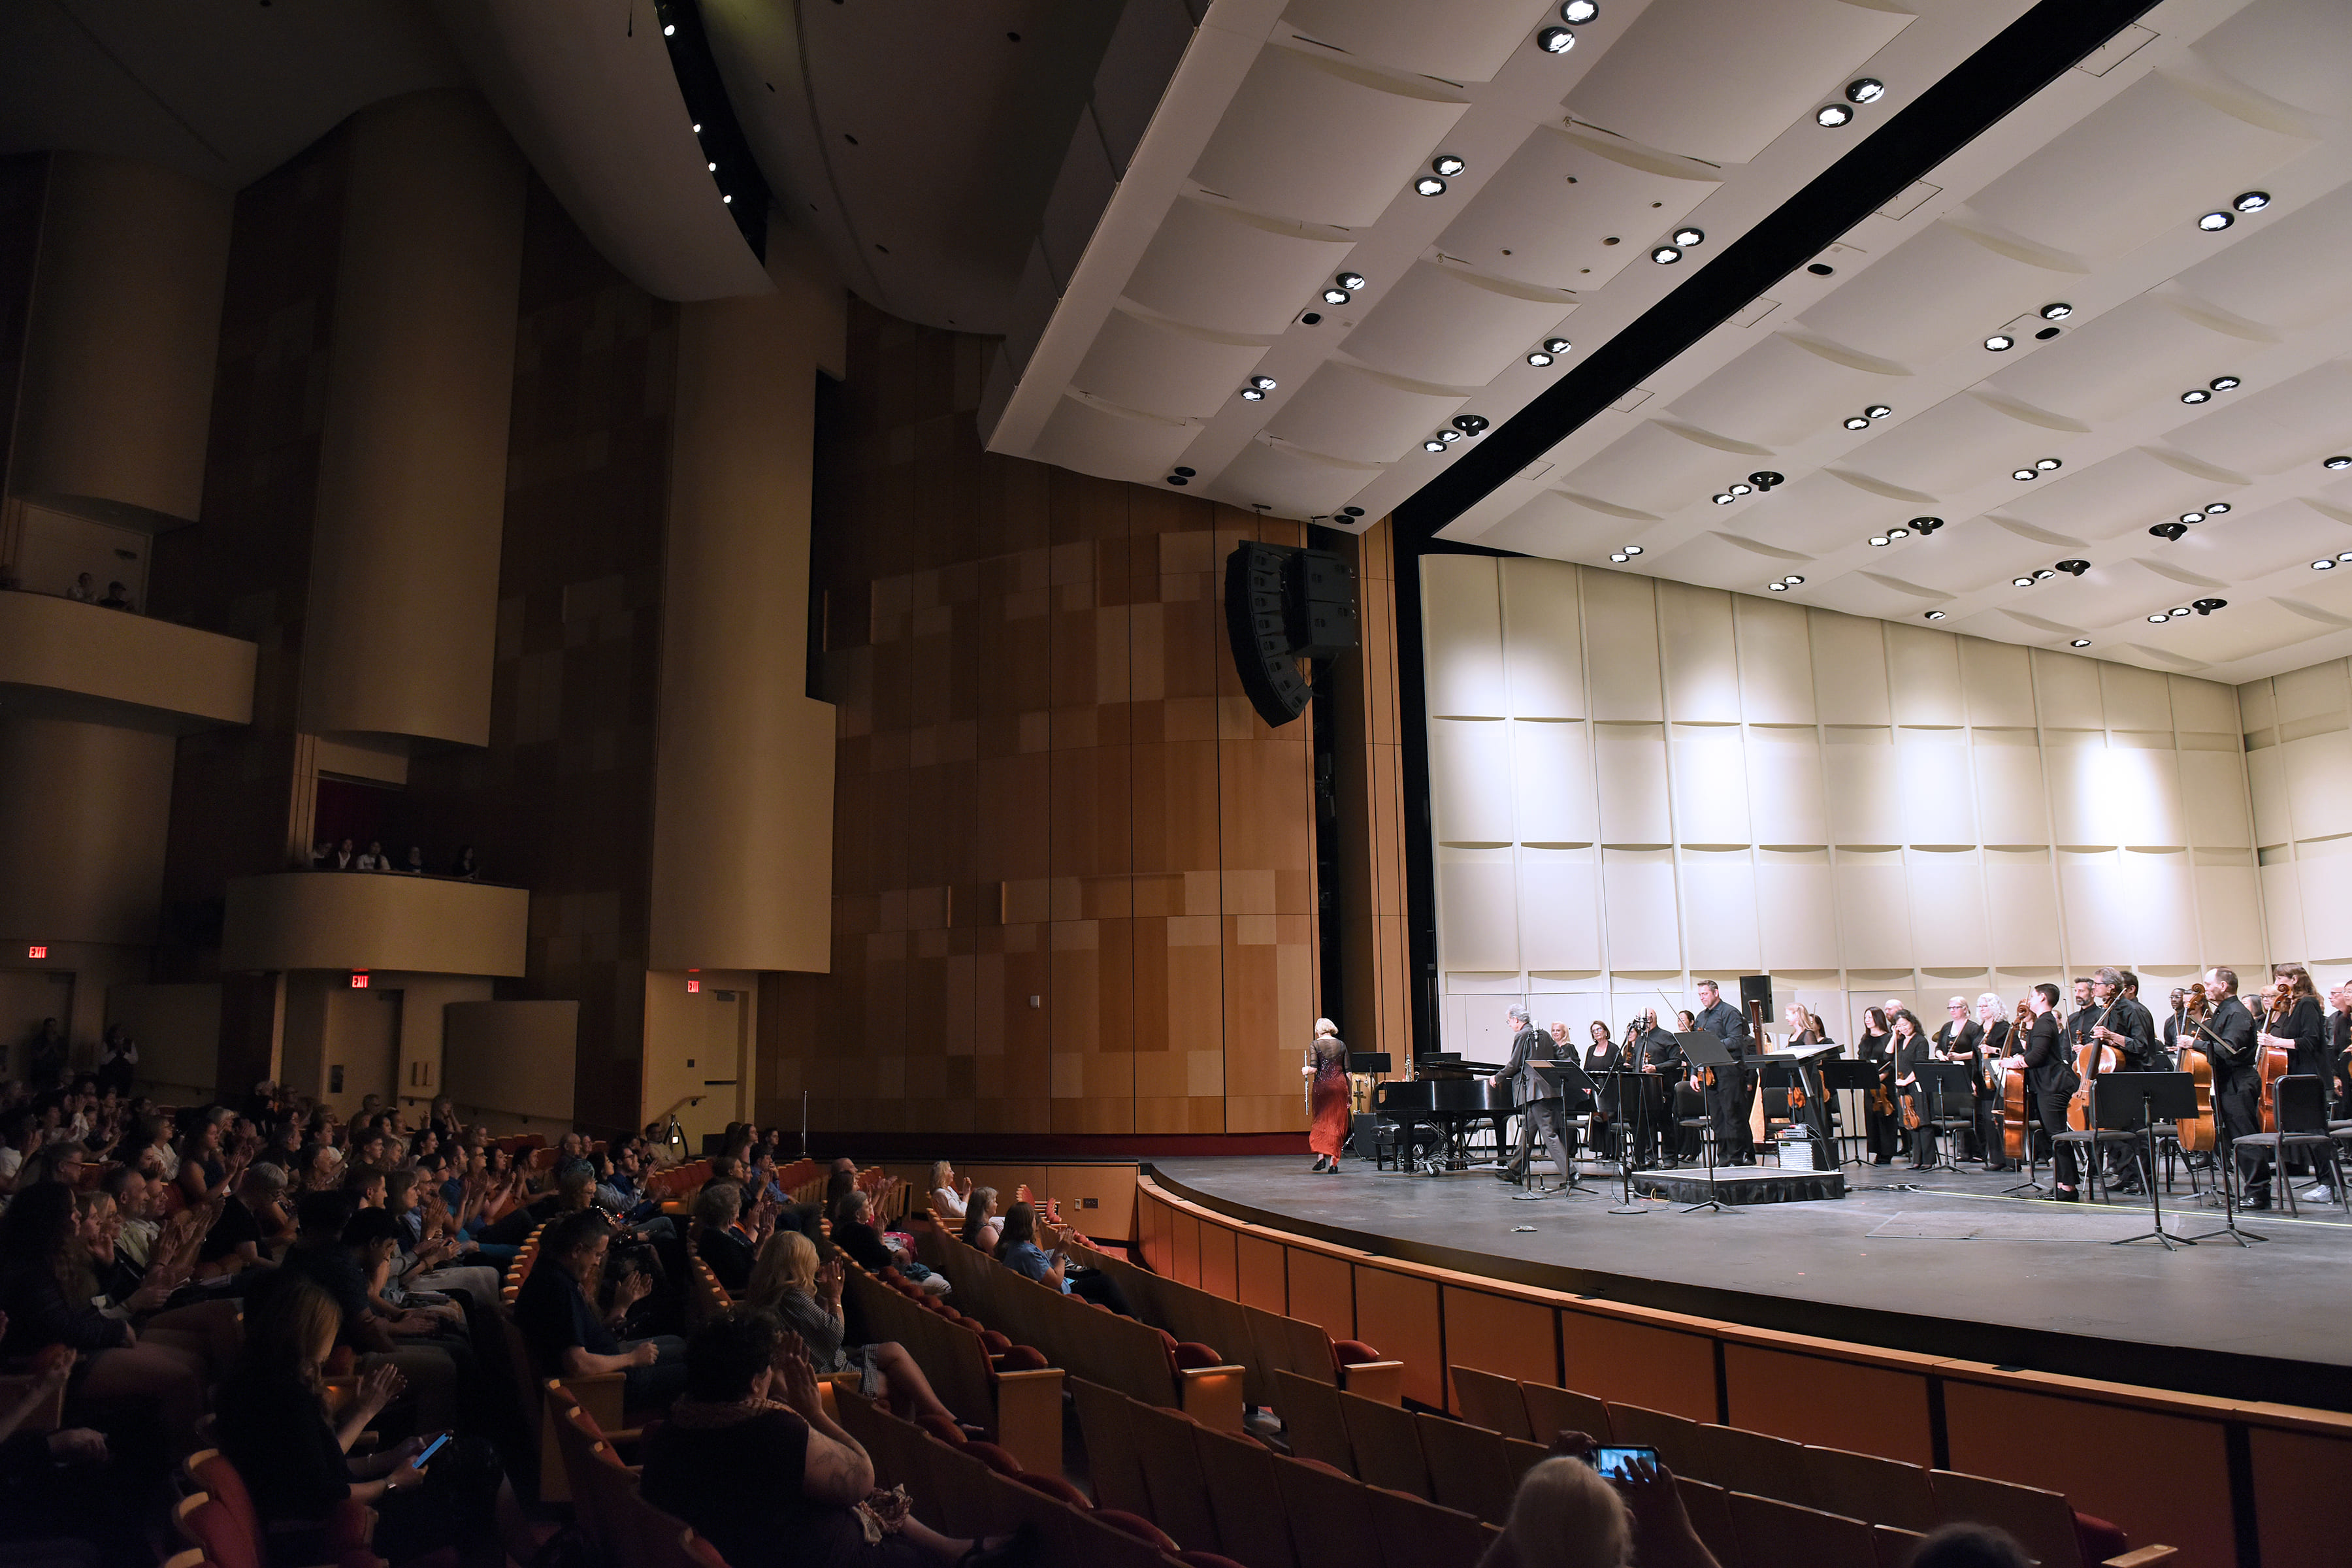 An orchestra performs in an auditorium